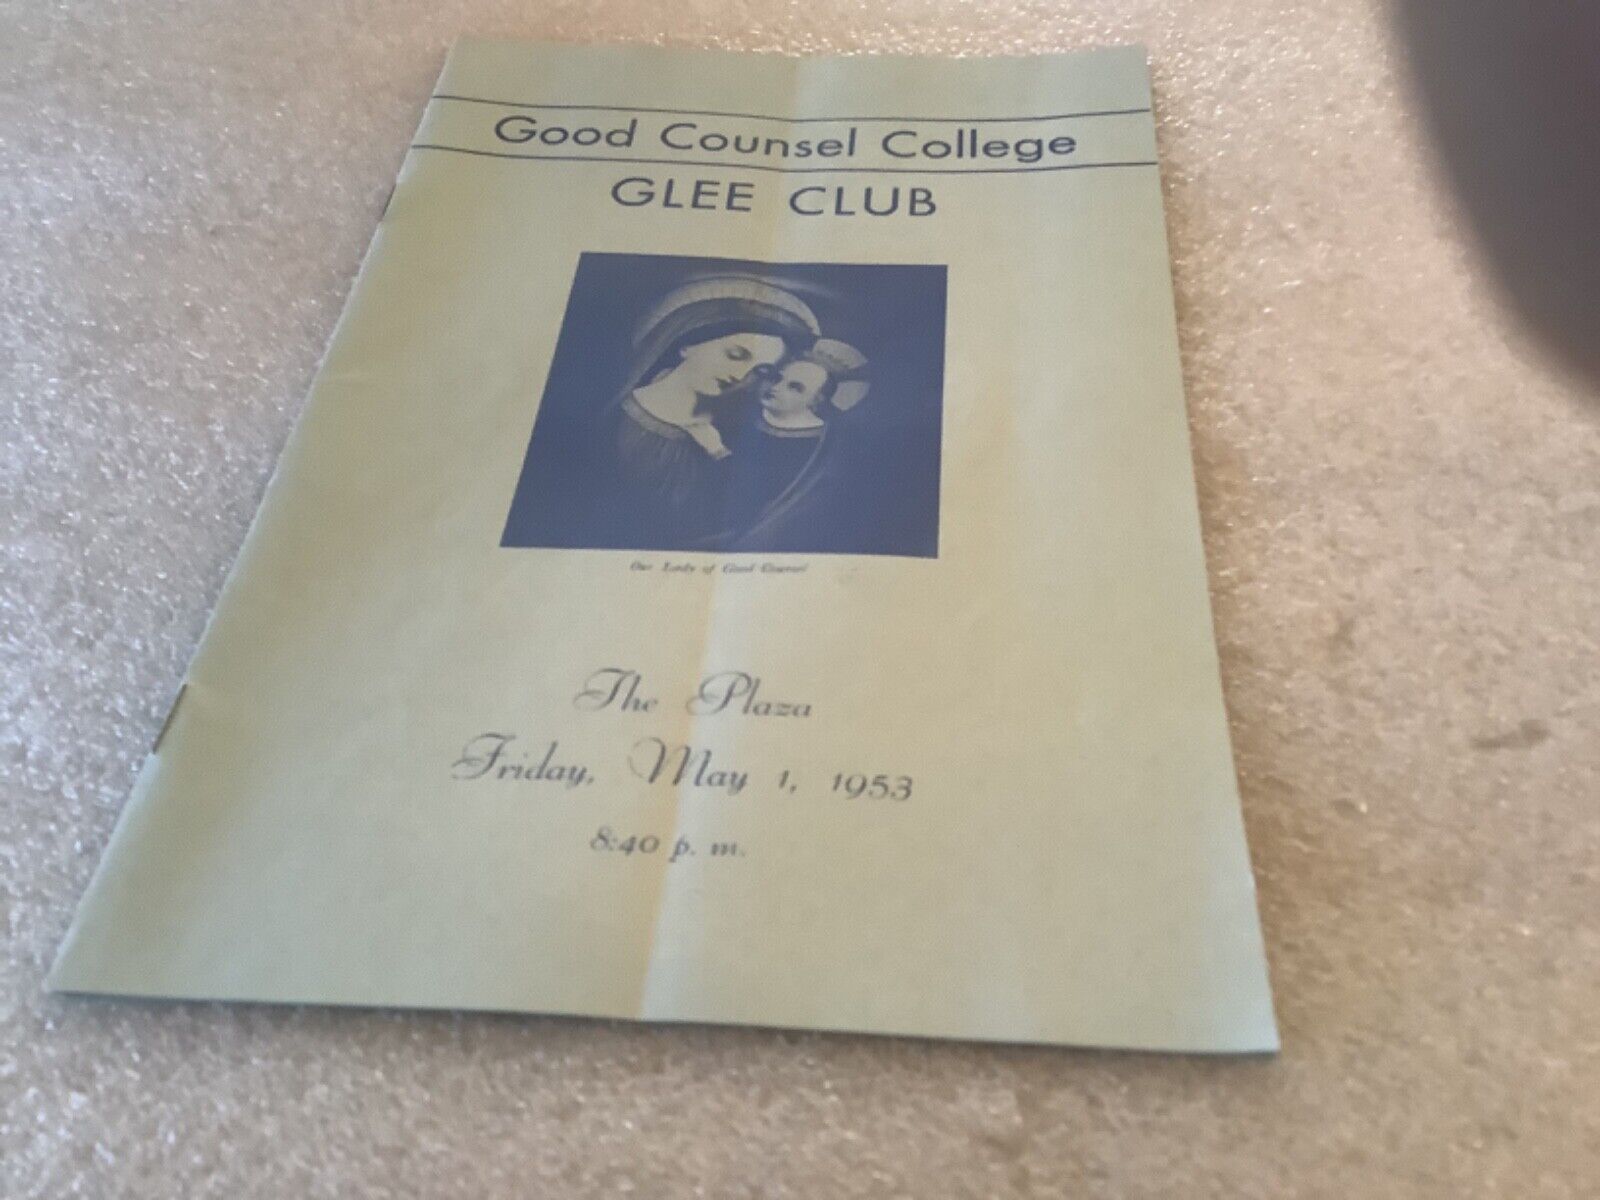 VINTAGE MAY 1, 1953 GOOD COUNSEL COLLEGE GLEE CLUB PROGRAM